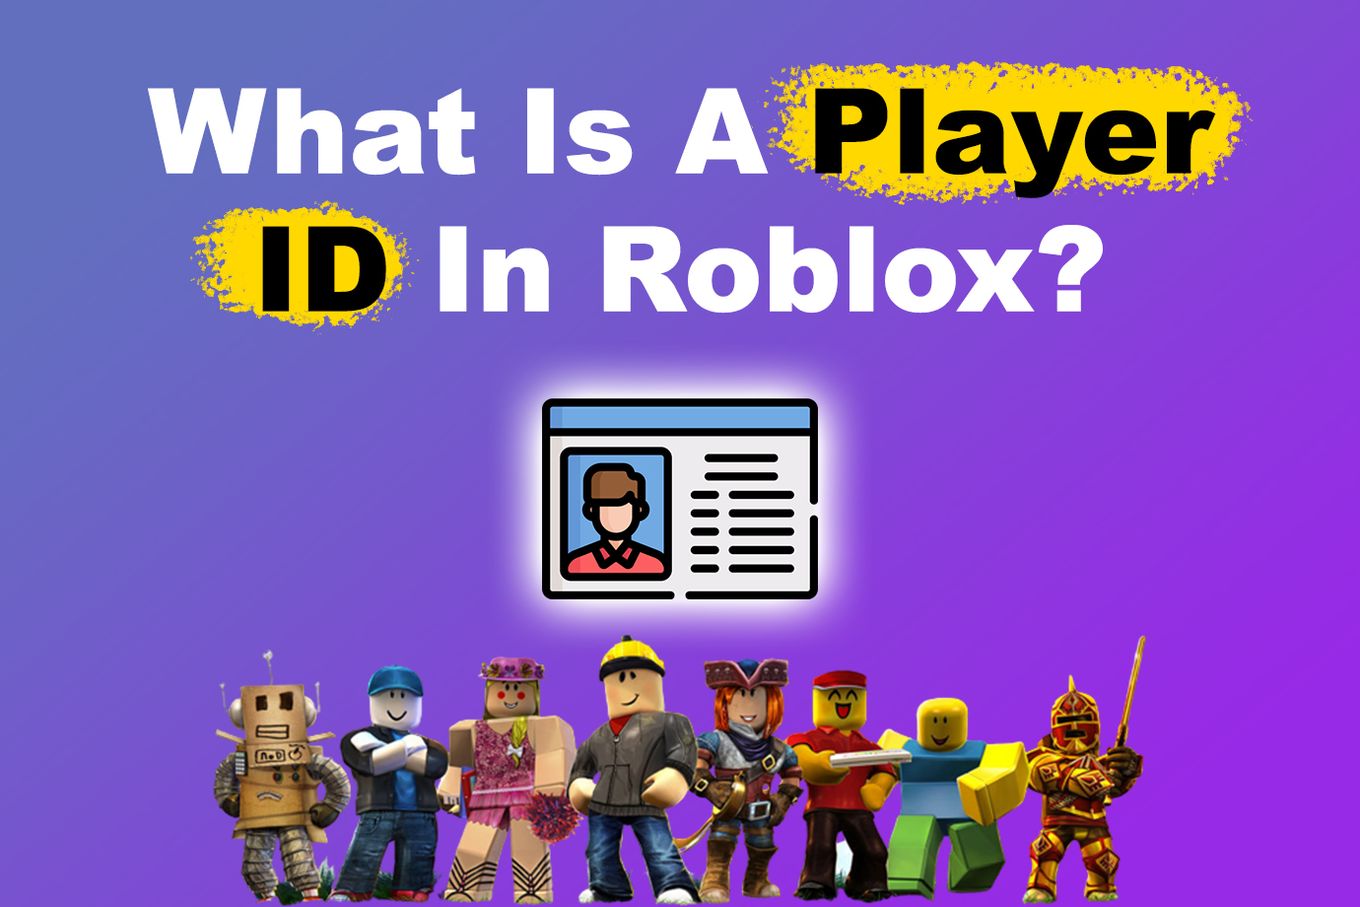 What is a Player ID in Roblox?